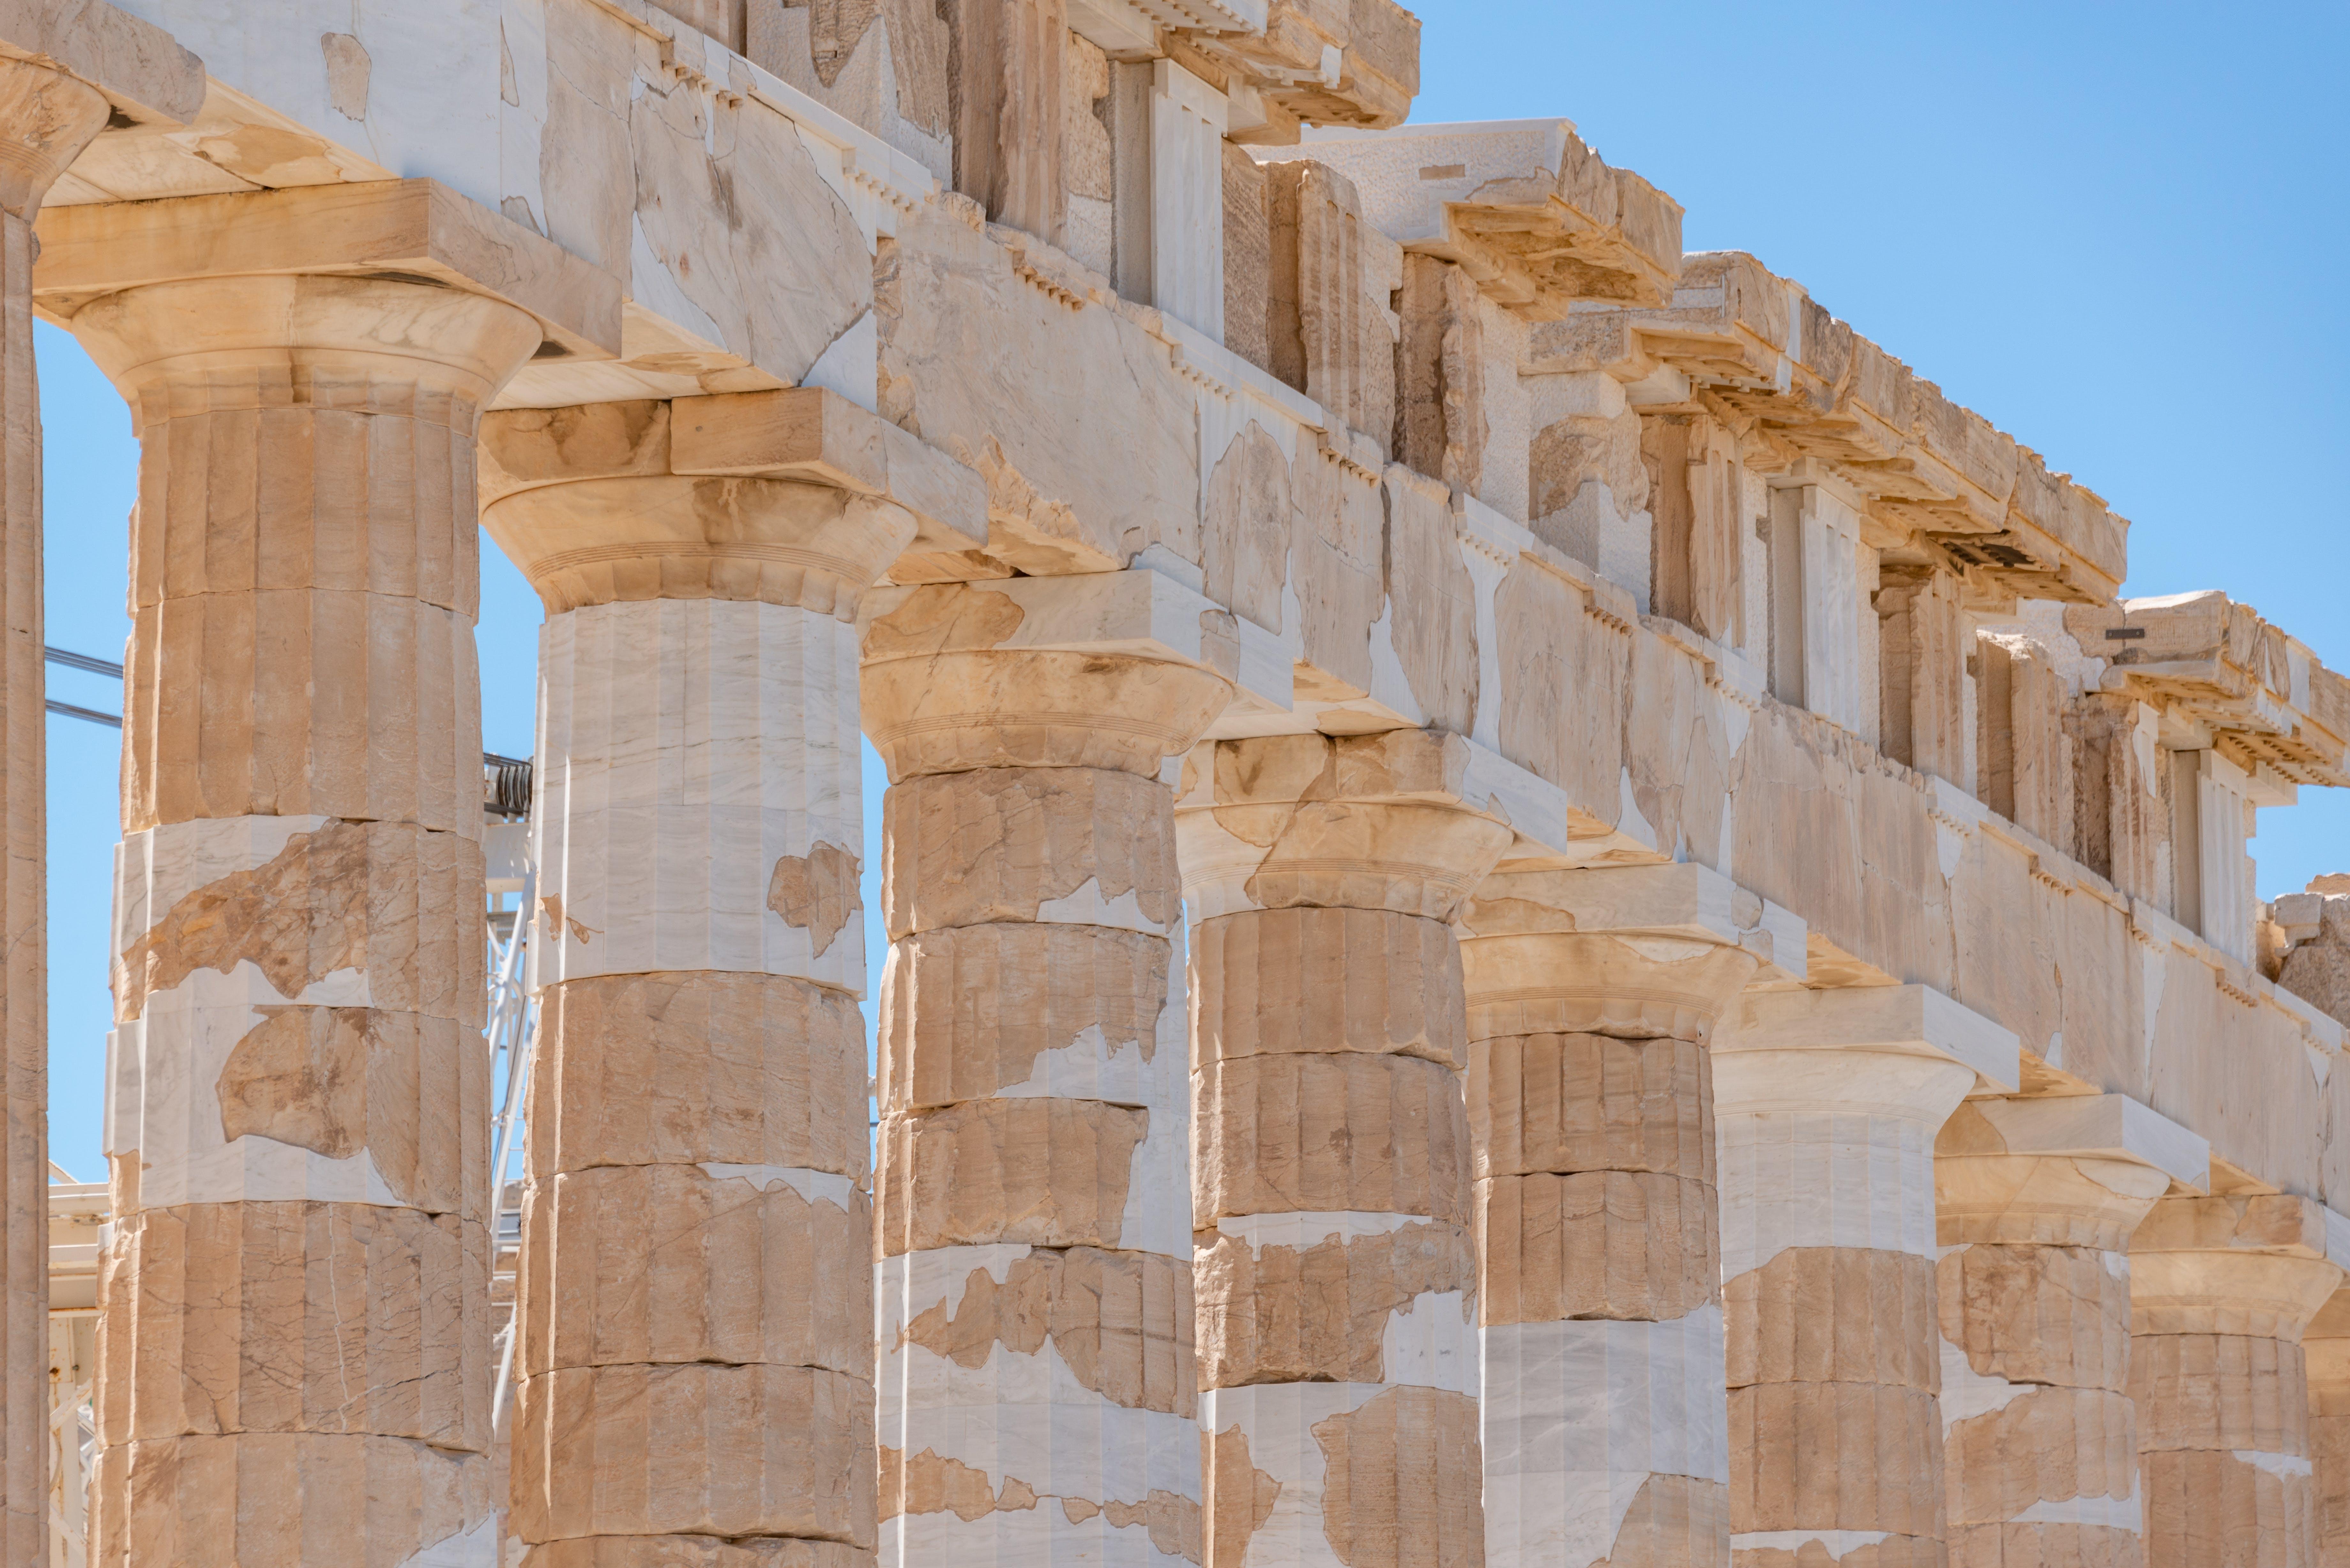 How did the Romans improve on Greek architecture? 